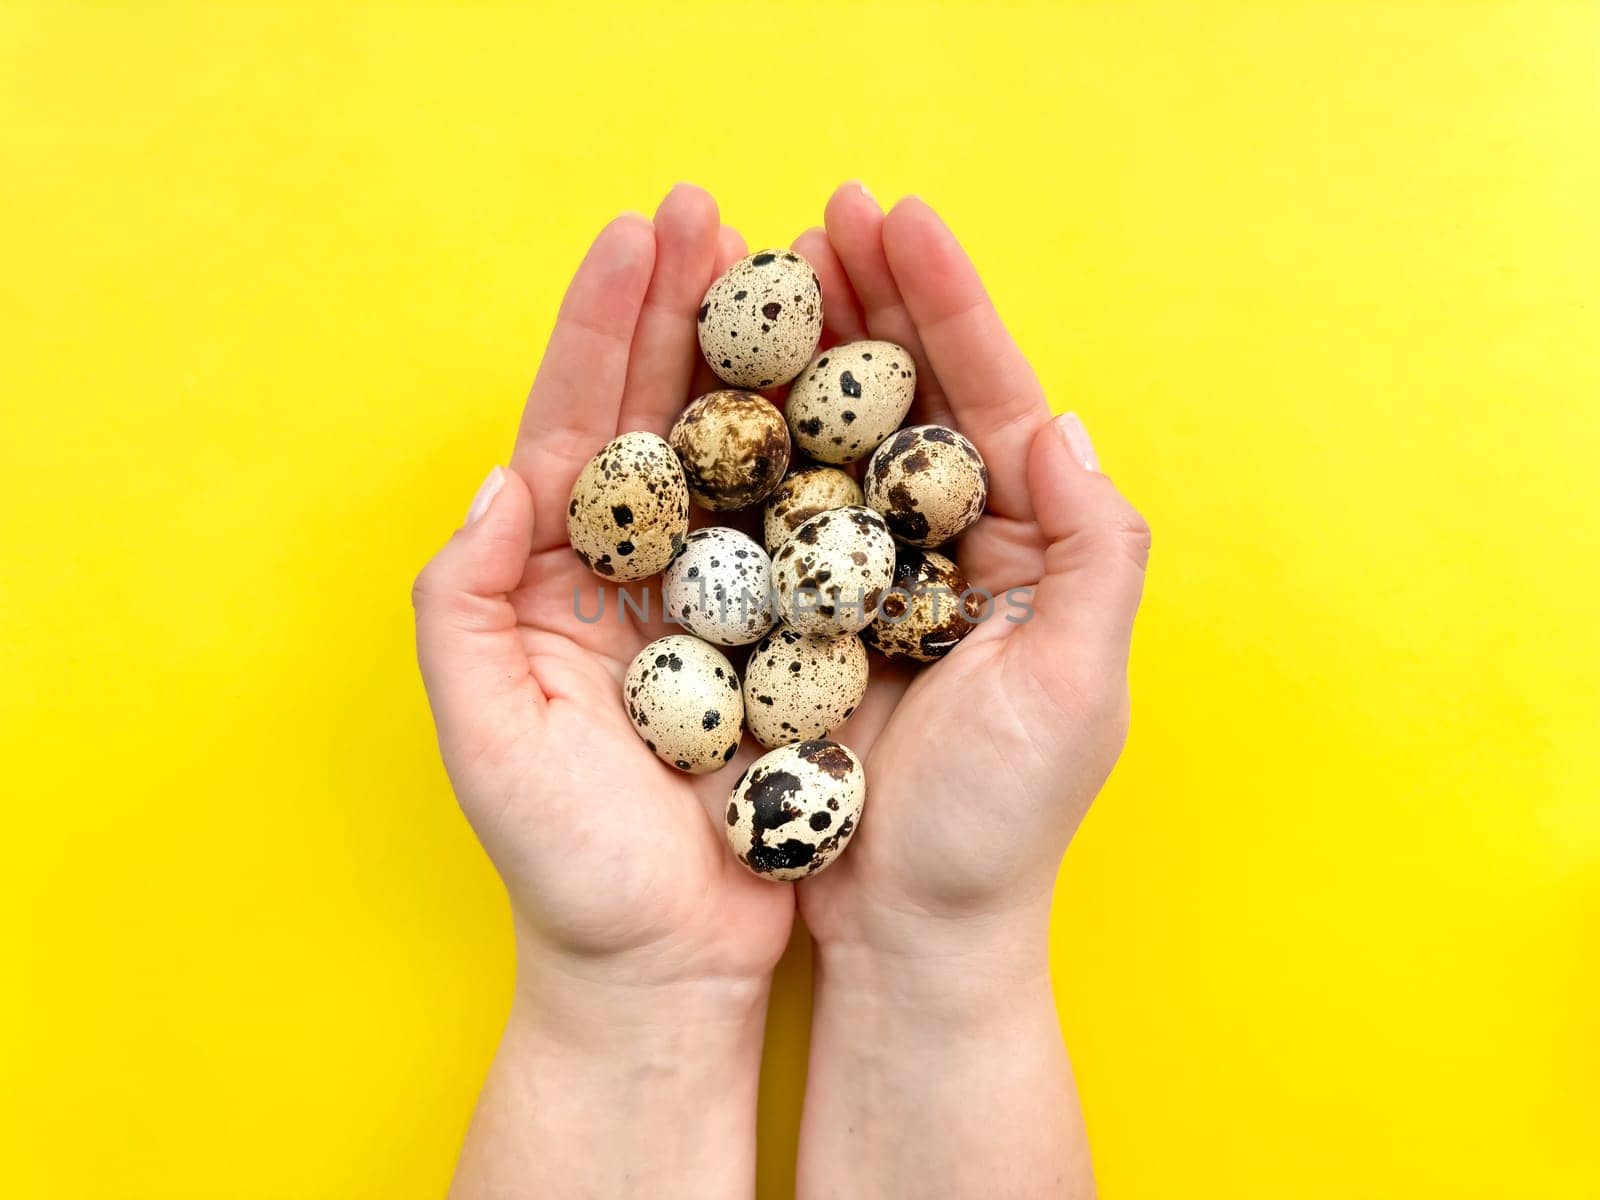 Hands presenting quail eggs against vibrant yellow background, depicting concepts of organic produce and Easter decorations with space for text. High quality photo